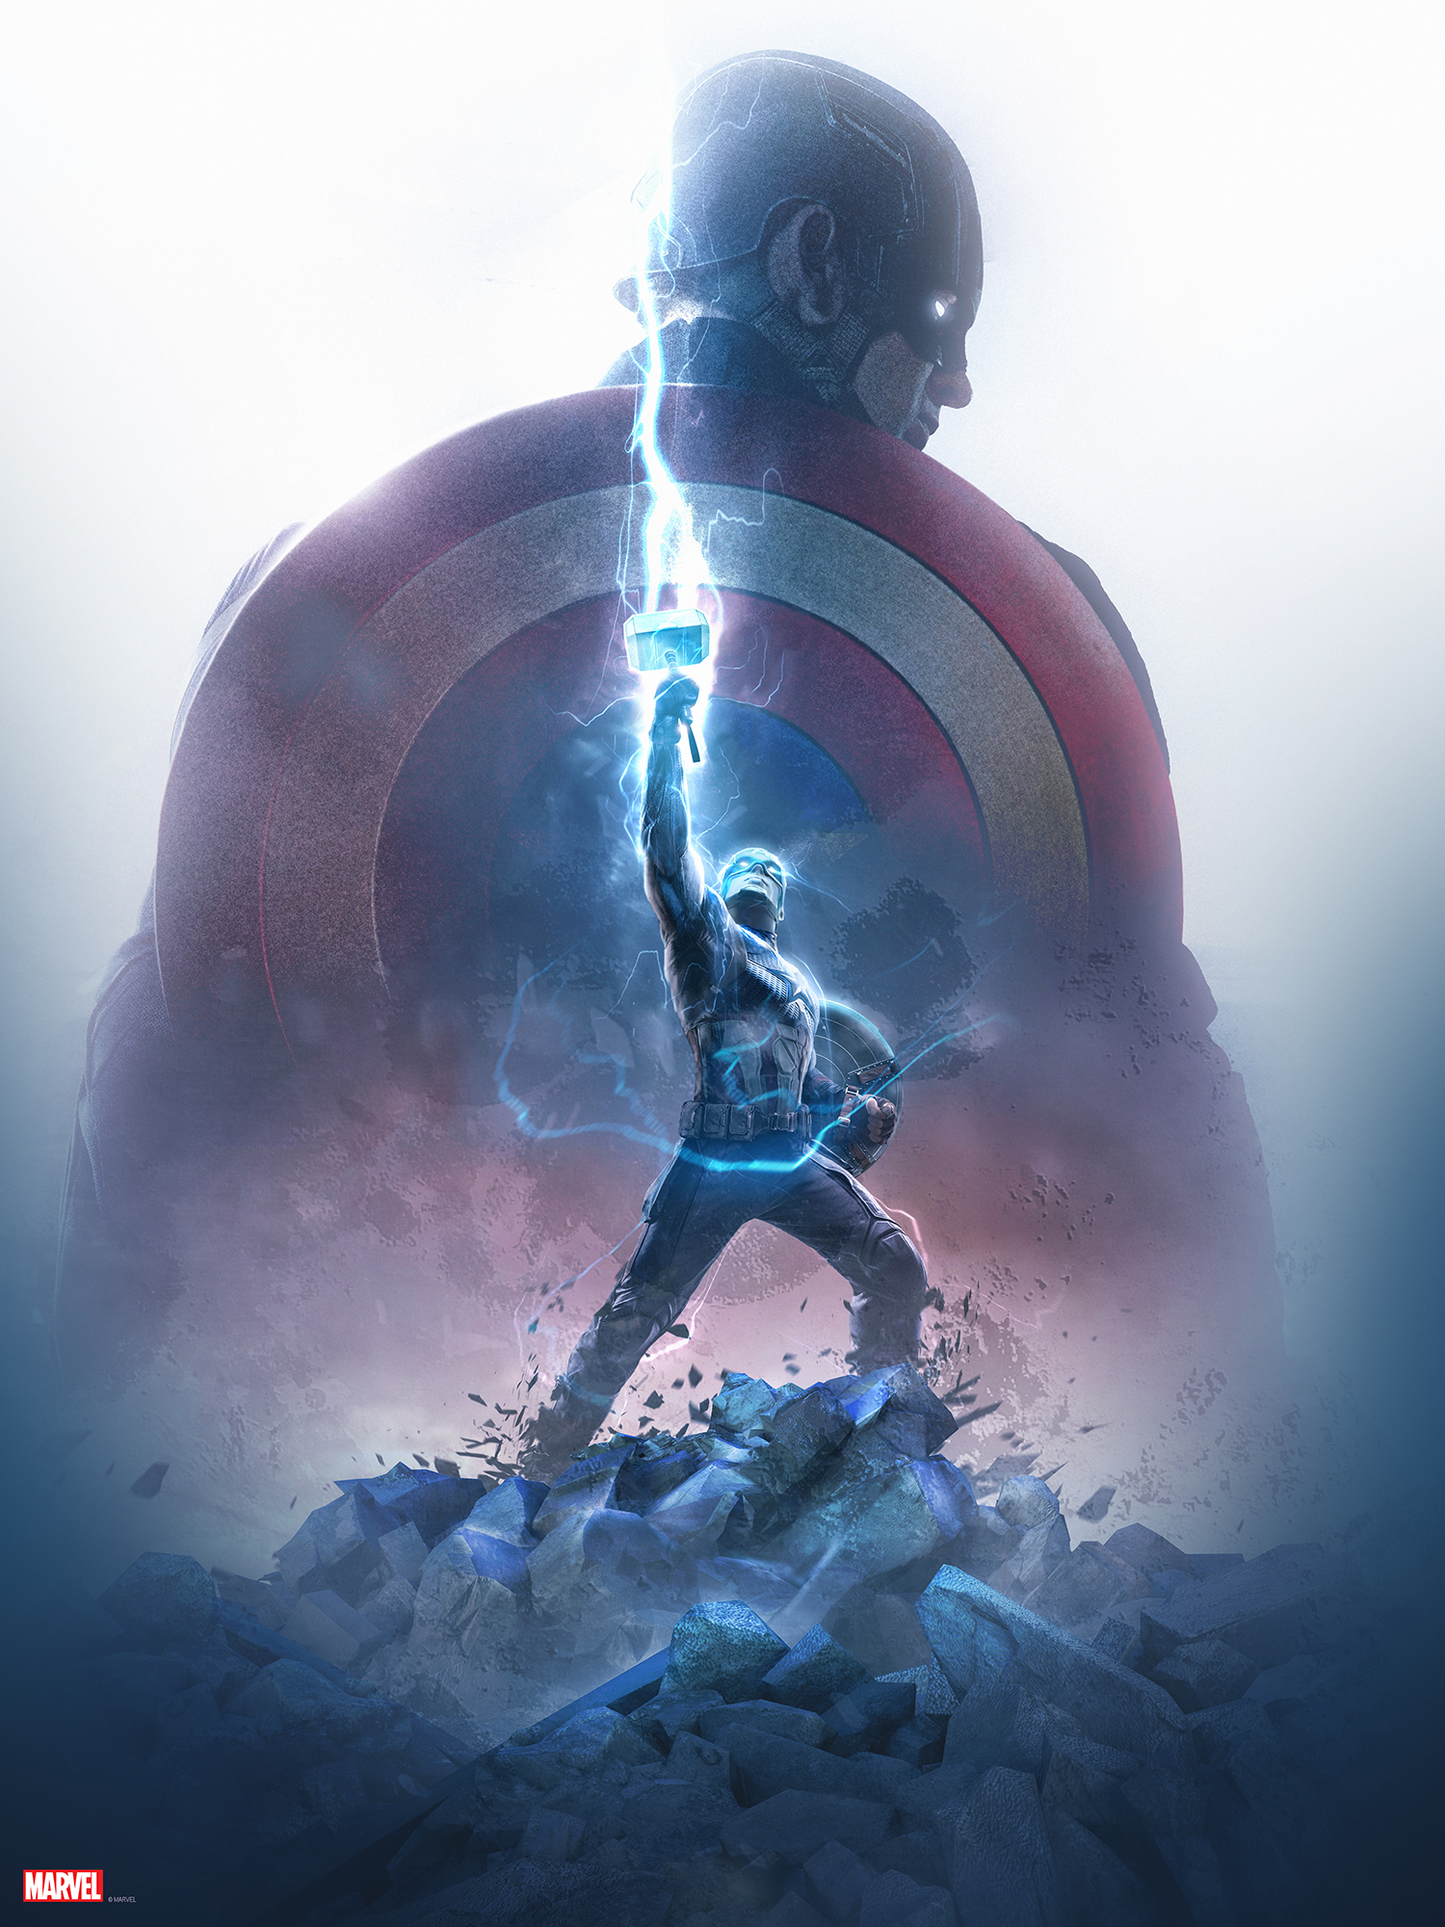 BossLogic "Worthy for the Cap"